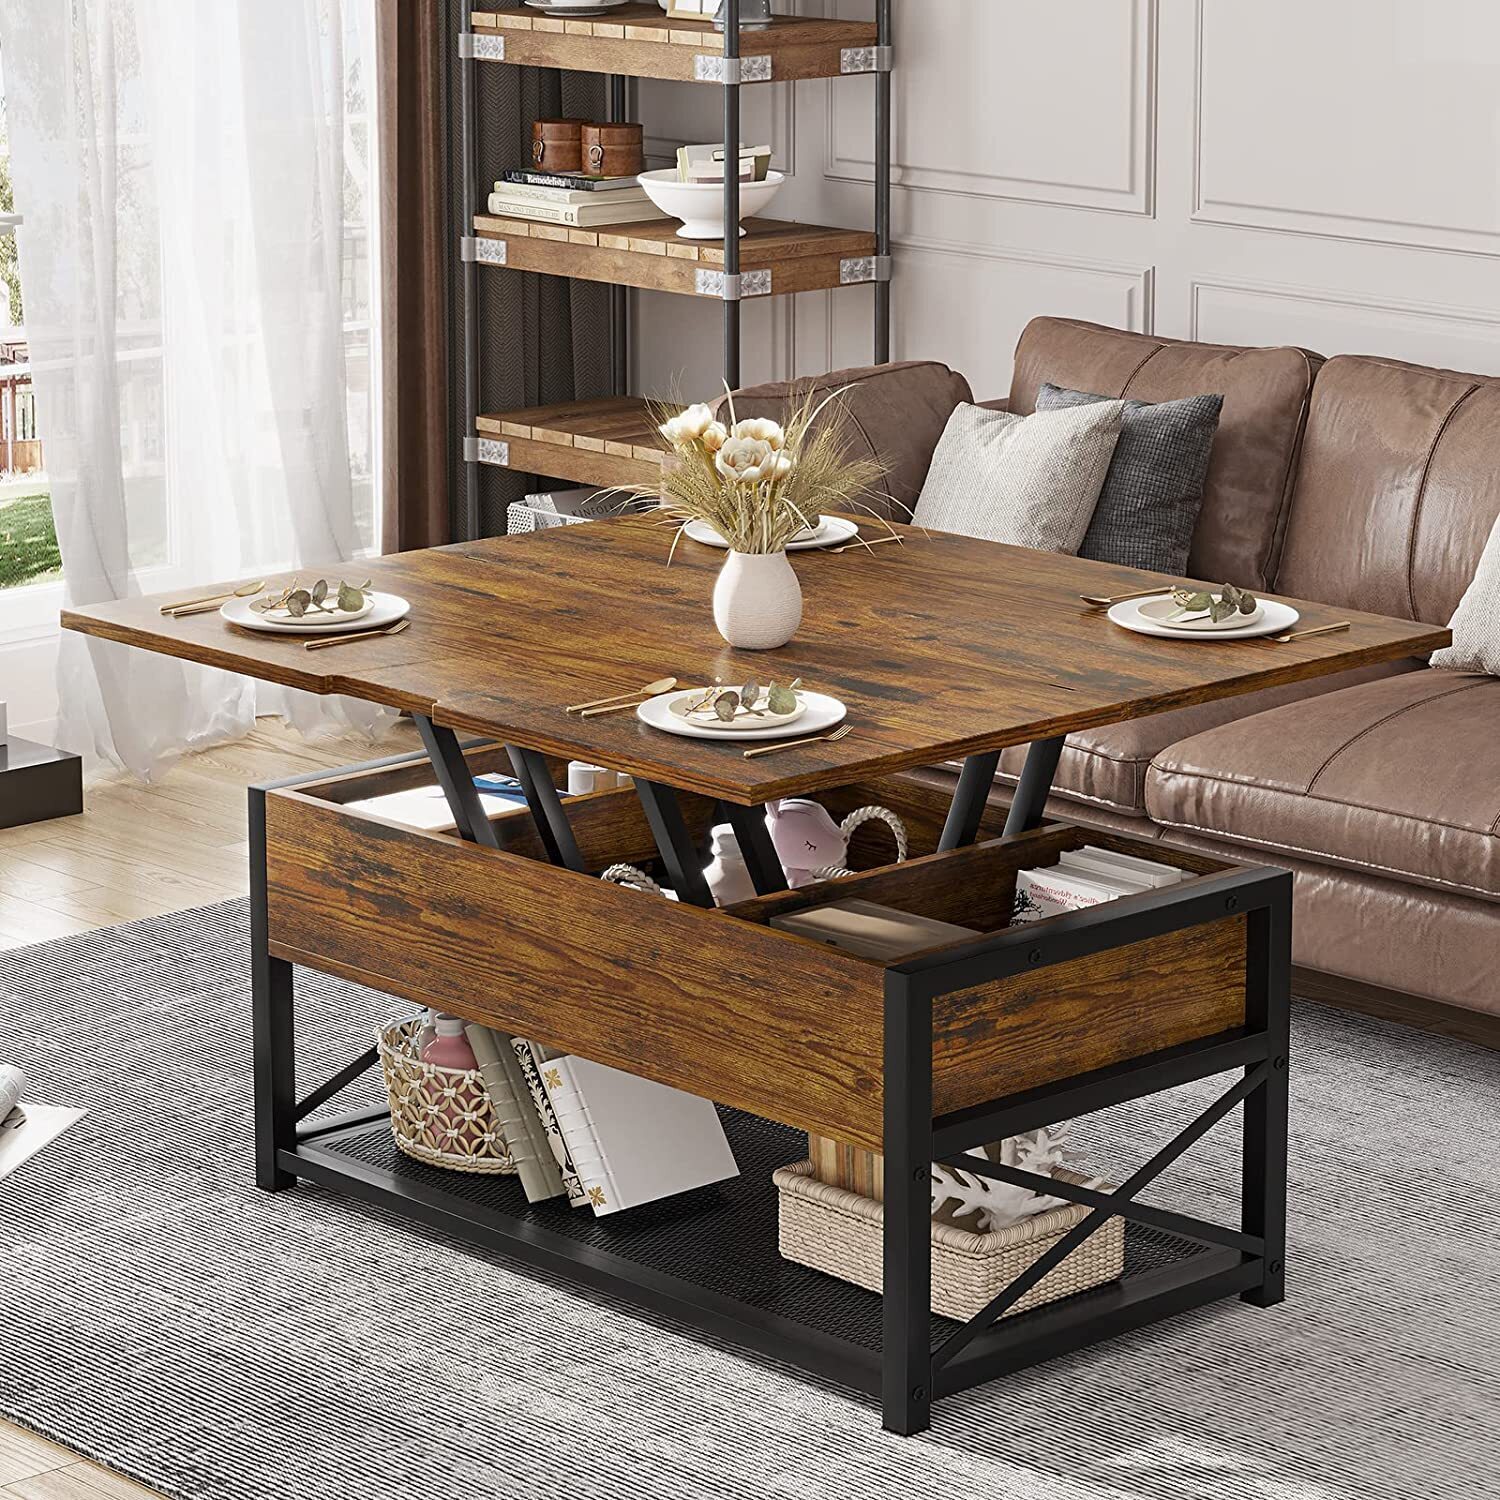 Coffee Table Converts to Dining Table